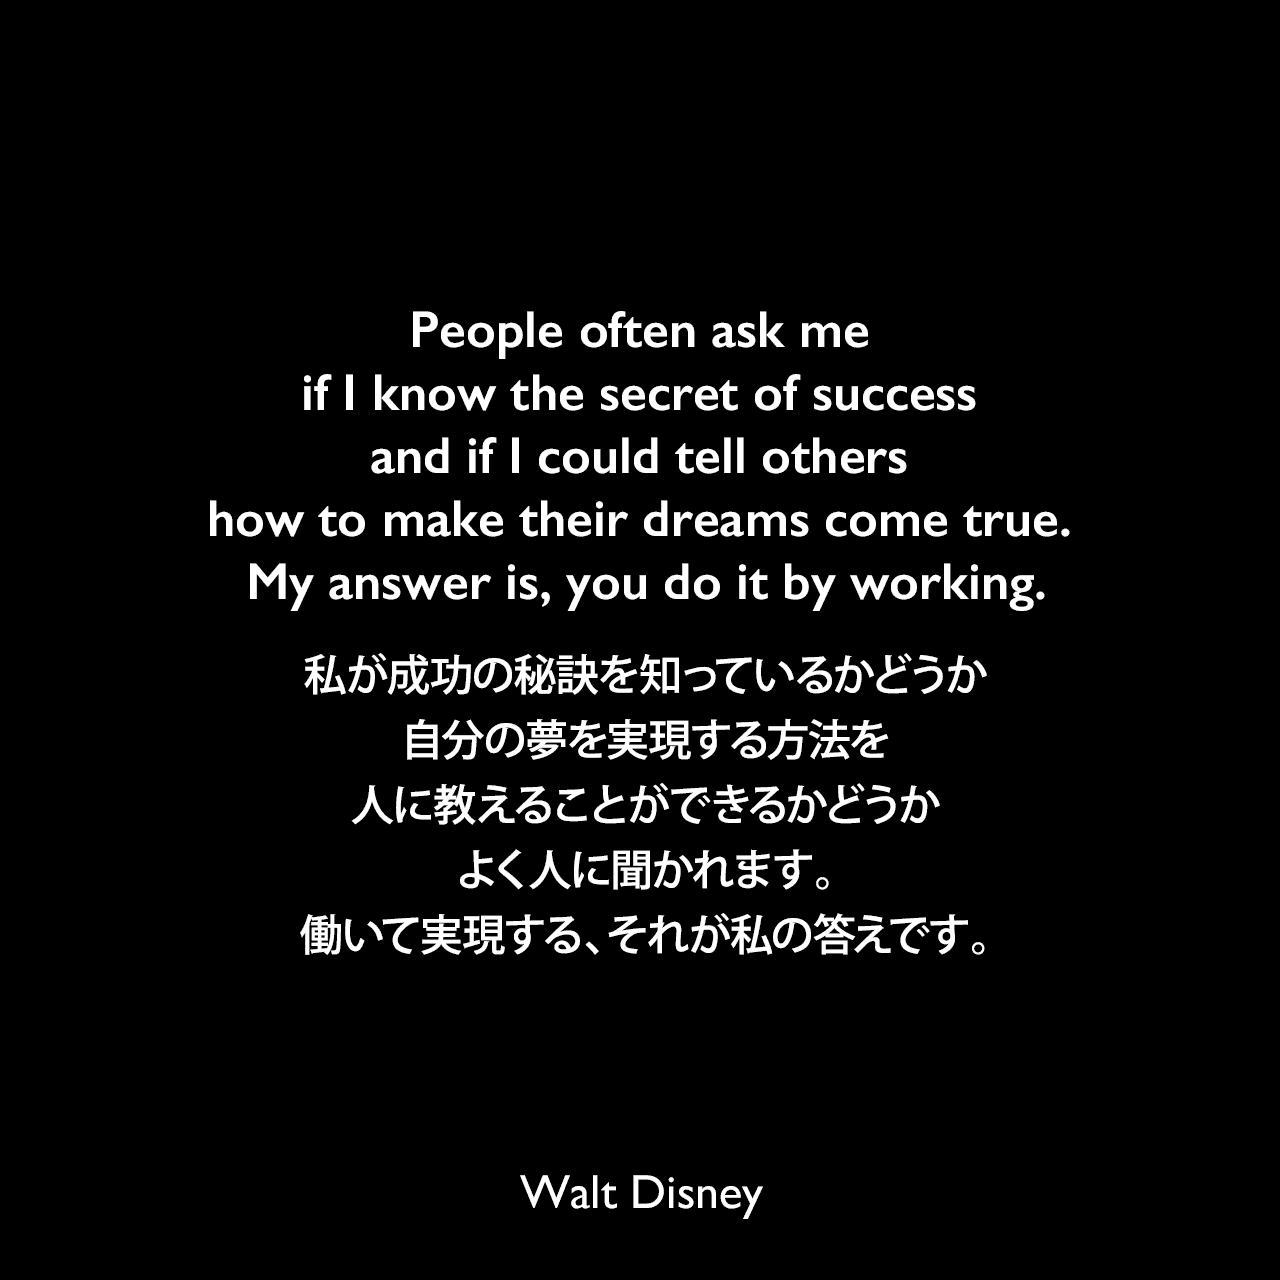 People often ask me if I know the secret of success and if I could tell others how to make their dreams come true. My answer is, you do it by working.私が成功の秘訣を知っているかどうか、自分の夢を実現する方法を人に教えることができるかどうか、よく人に聞かれます。働いて実現する、それが私の答えです。Walt Disney